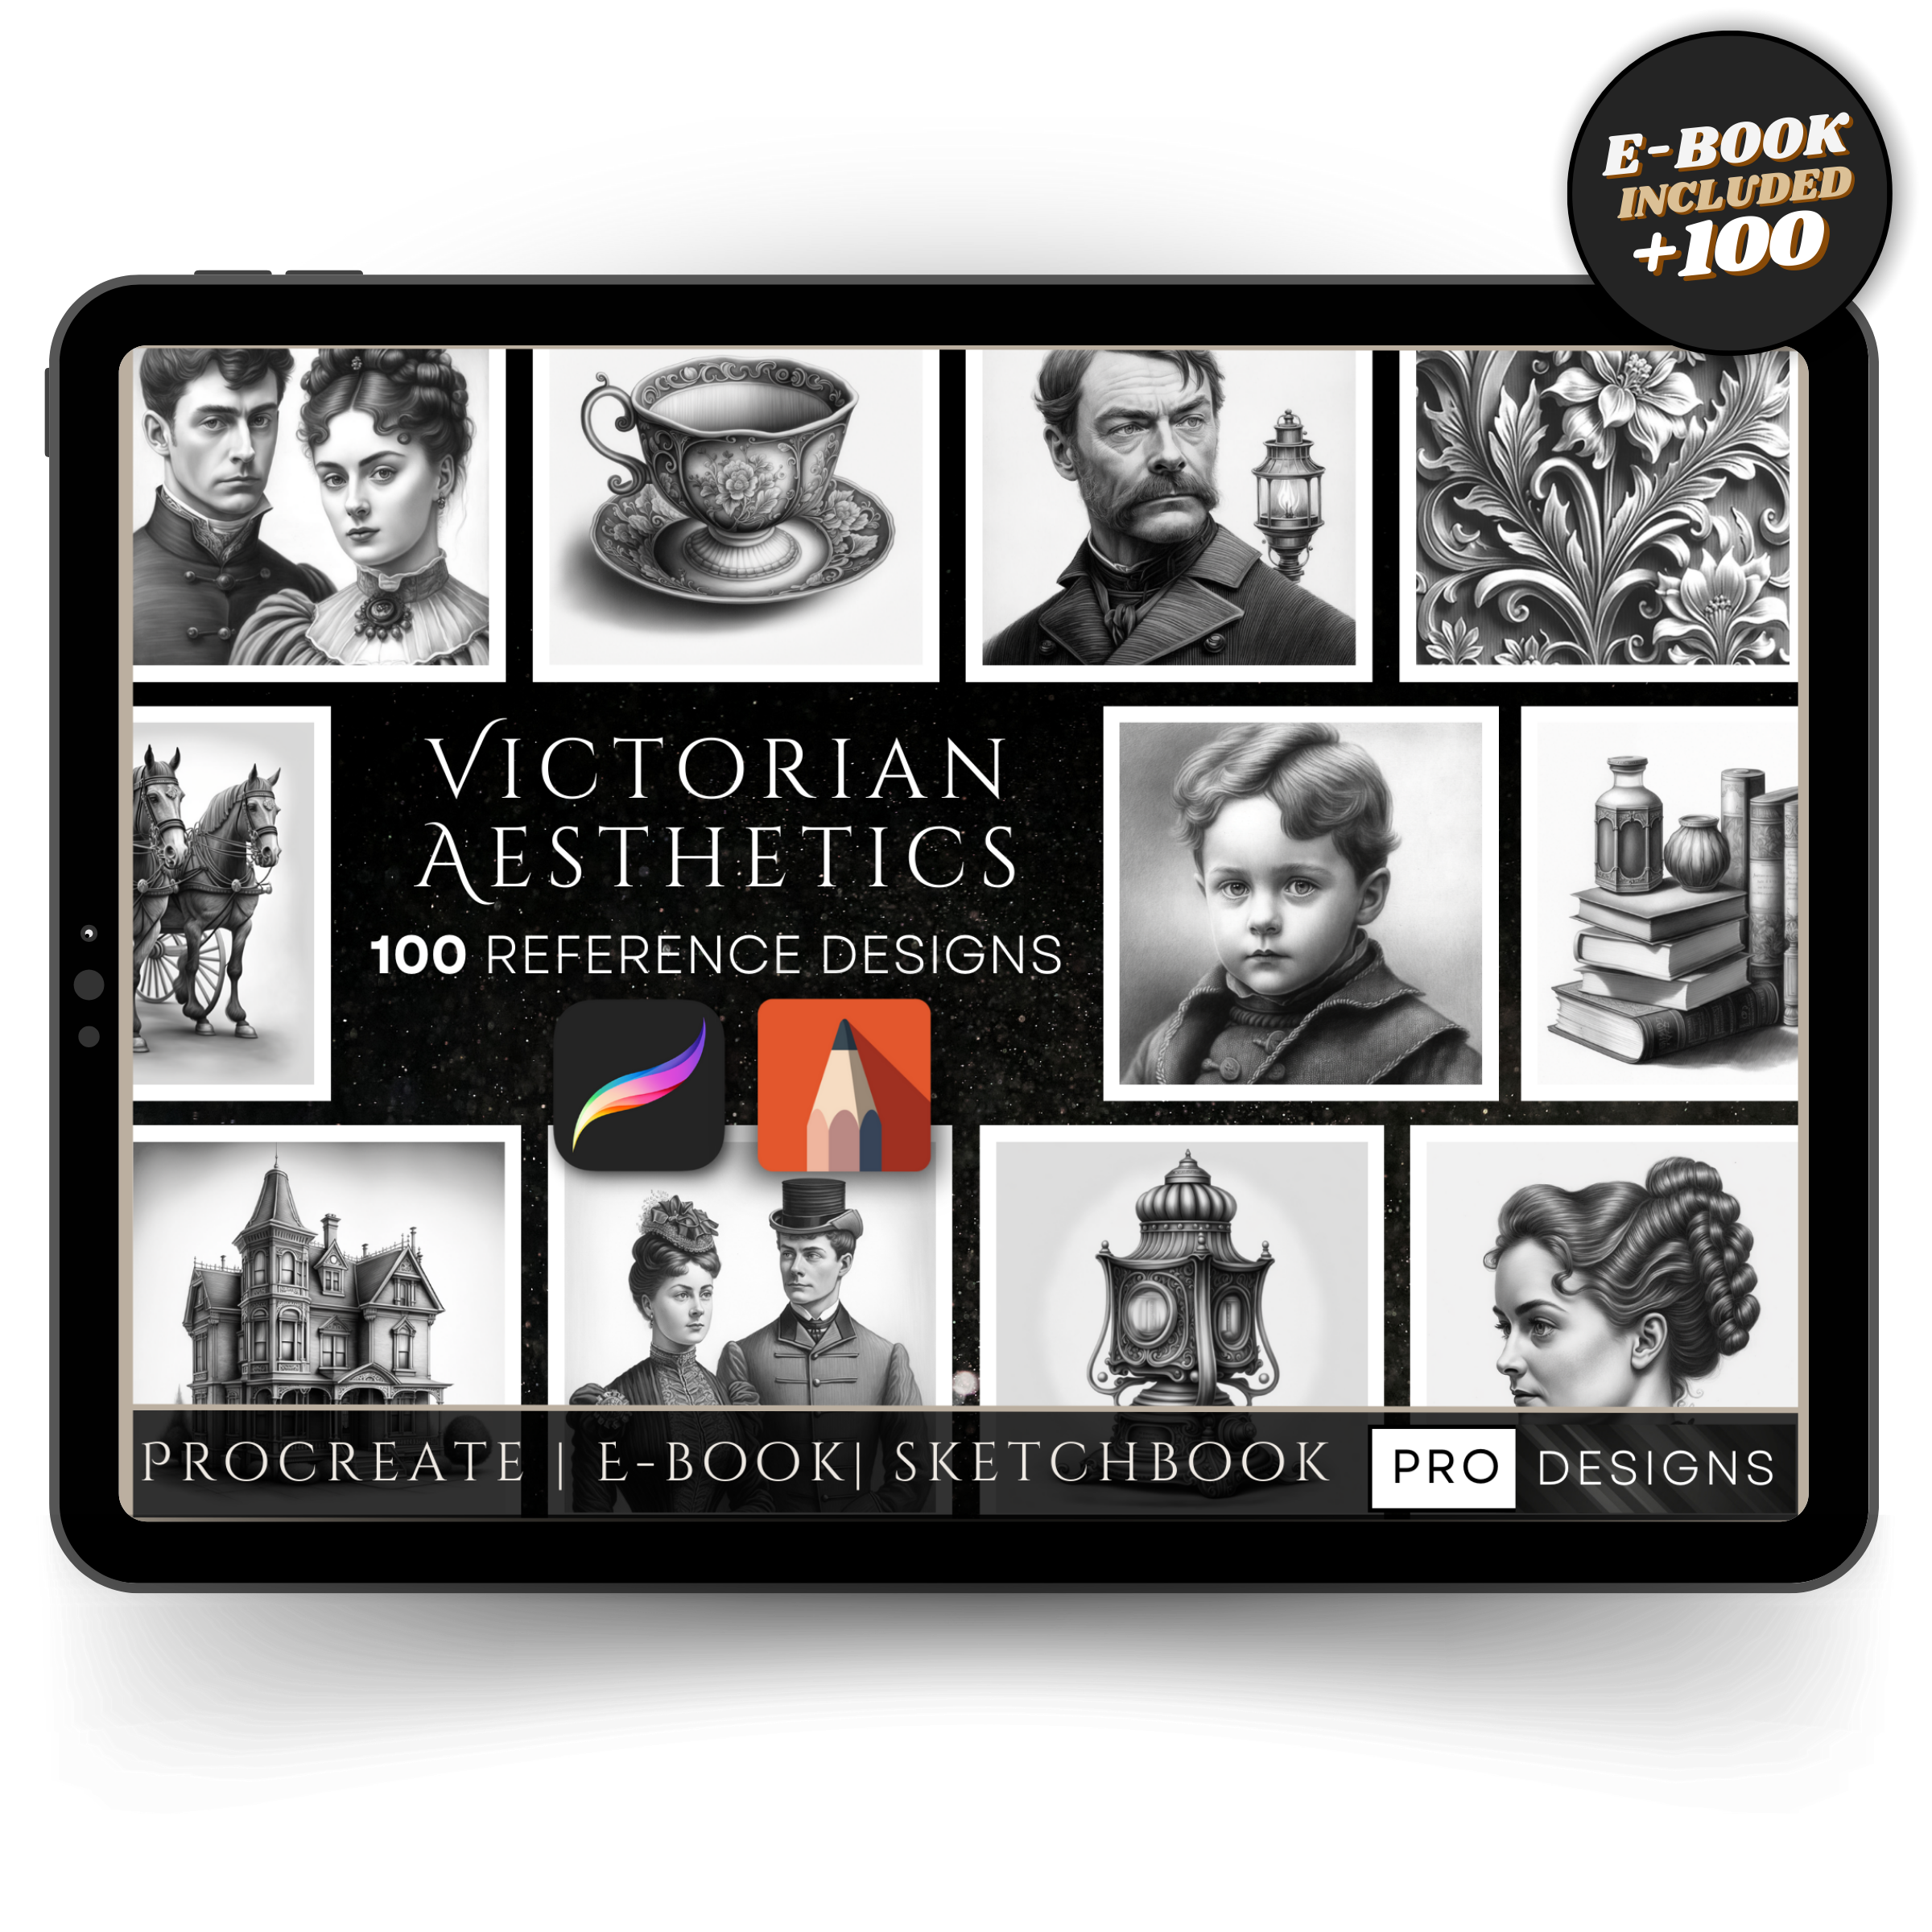 "Era of Elegance" - The Victorian Aesthetic Collection